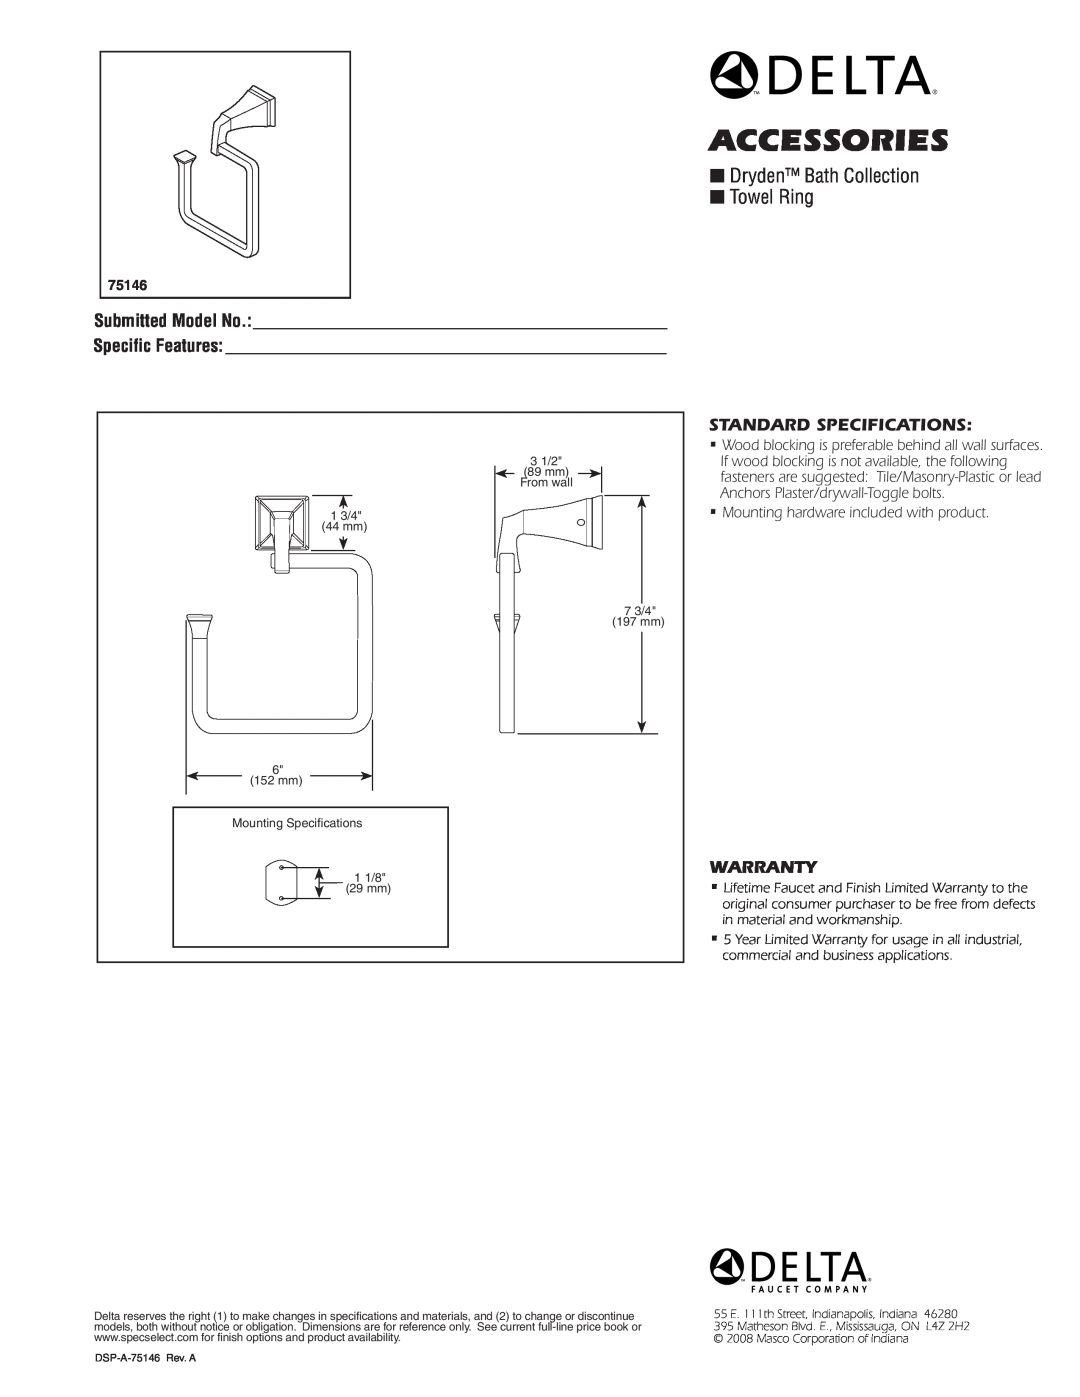 Delta 75146 specifications Accessories, Dryden Bath Collection Towel Ring, Submitted Model No Specific Features, Warranty 